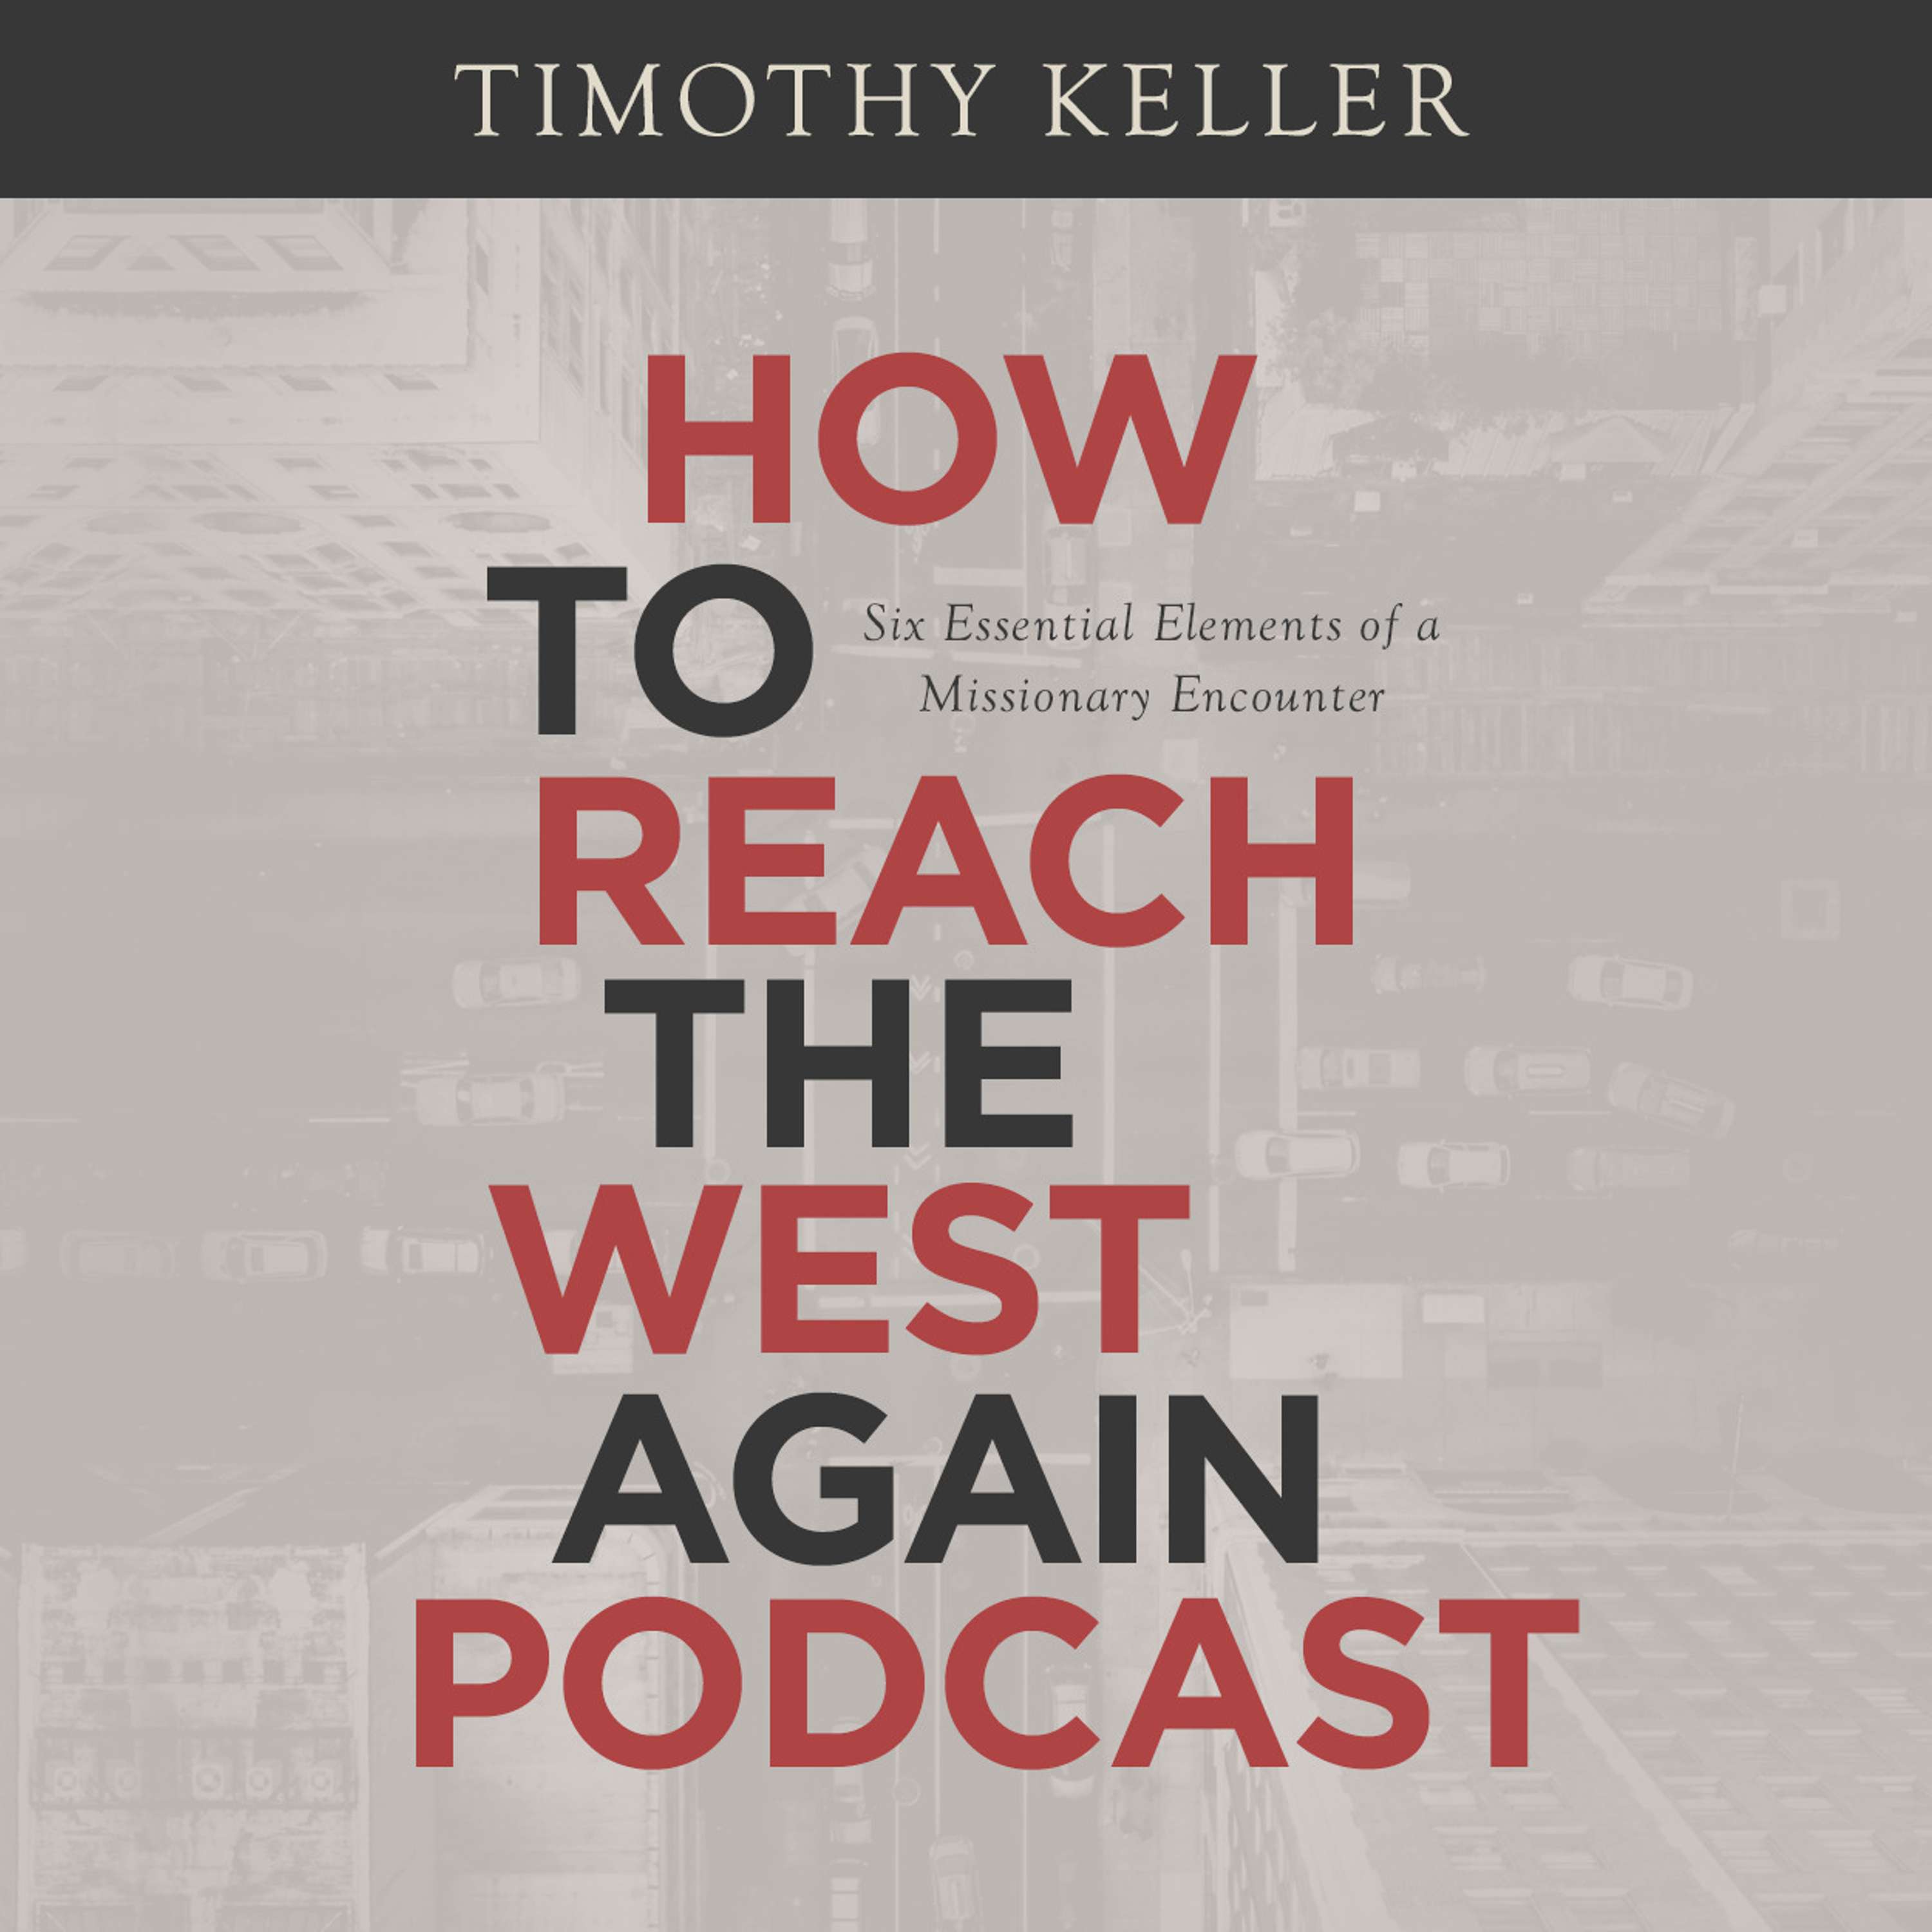 S1E1: The Challenges of Reaching the West